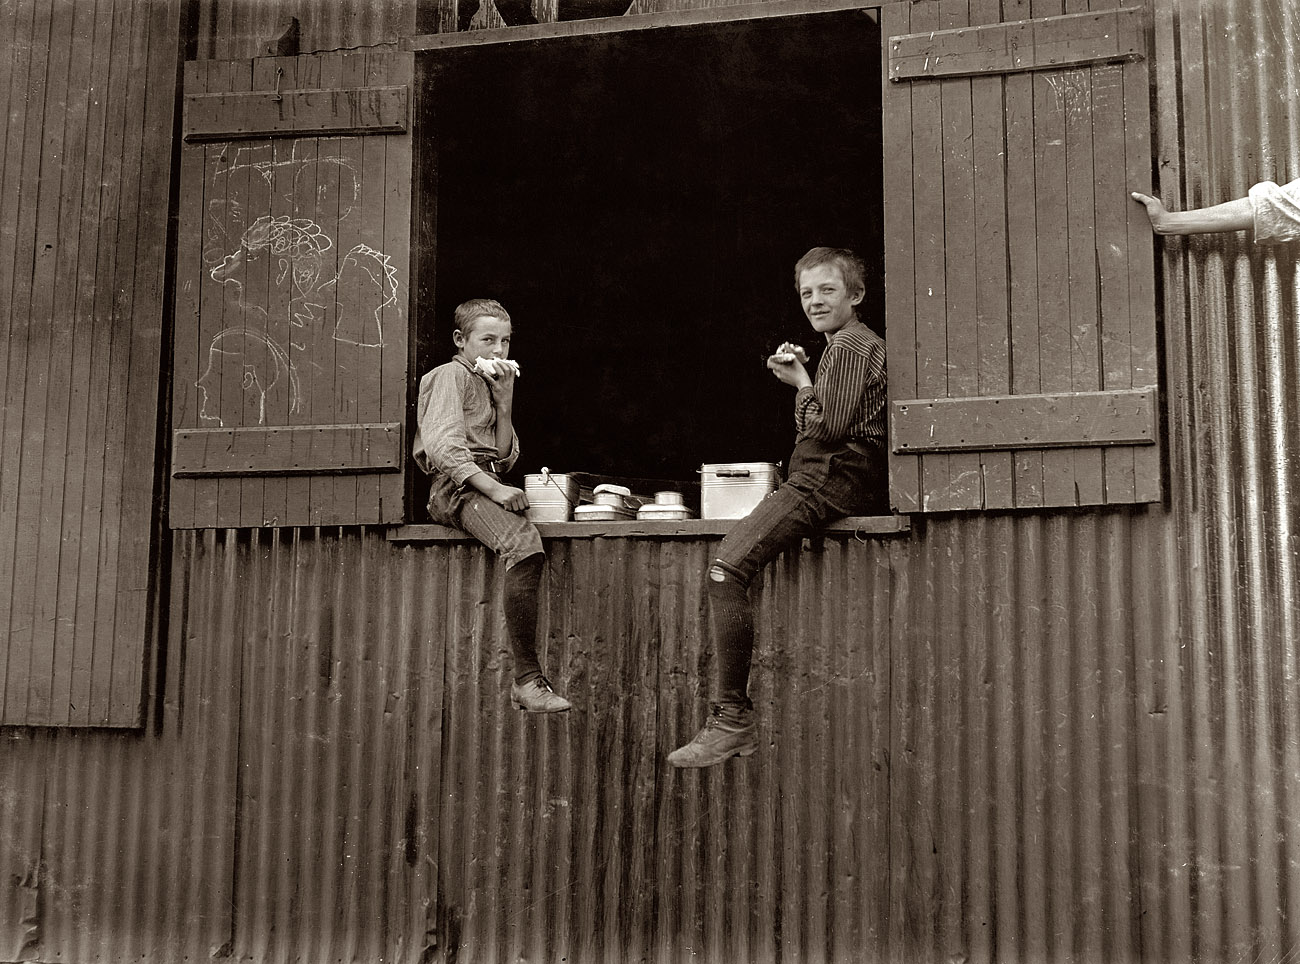 October 1908. "Lunch time at the Economy Glass Works in Morgantown, W. Va. Plenty more like this inside." View full size. Photograph by Lewis Wickes Hine.